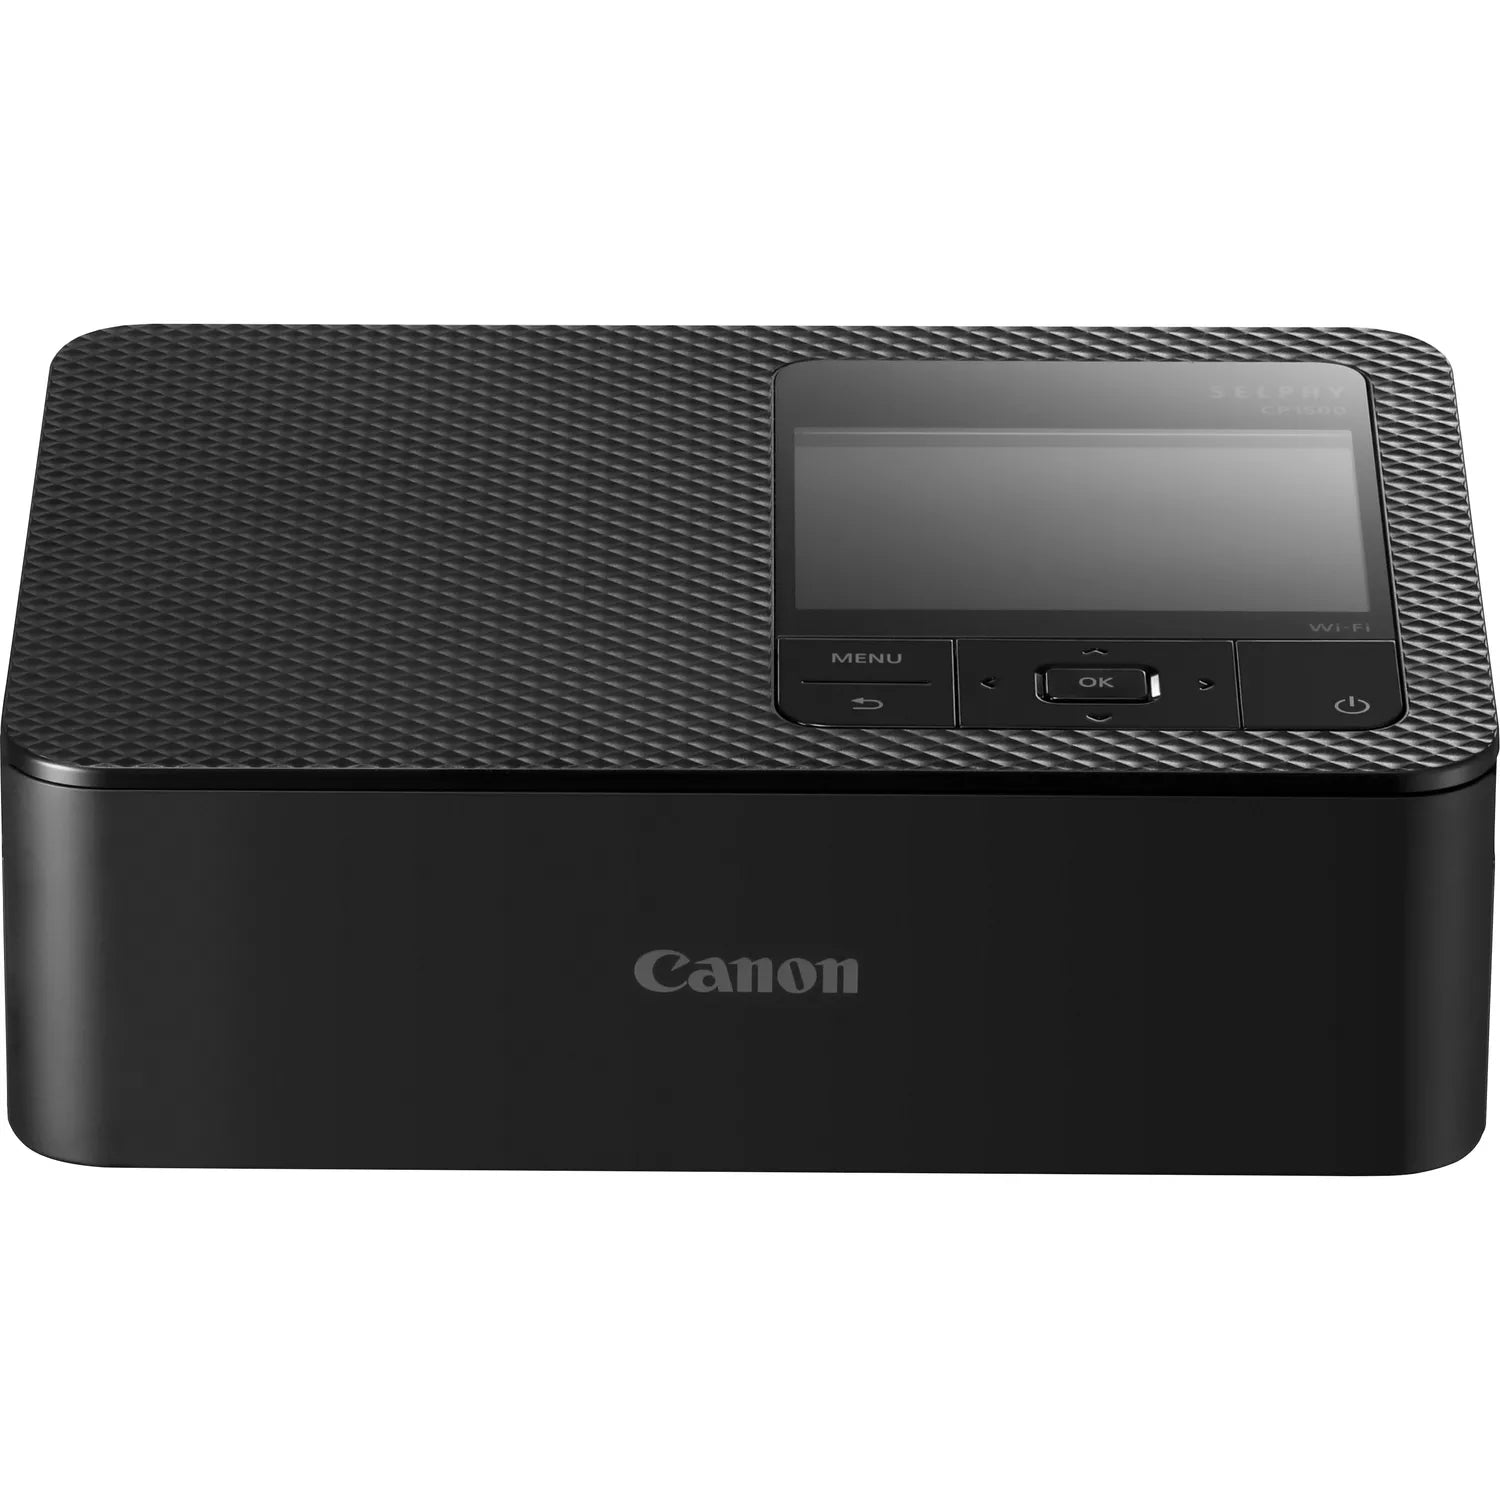 Product Image of Canon SELPHY CP1500 Printer - Black